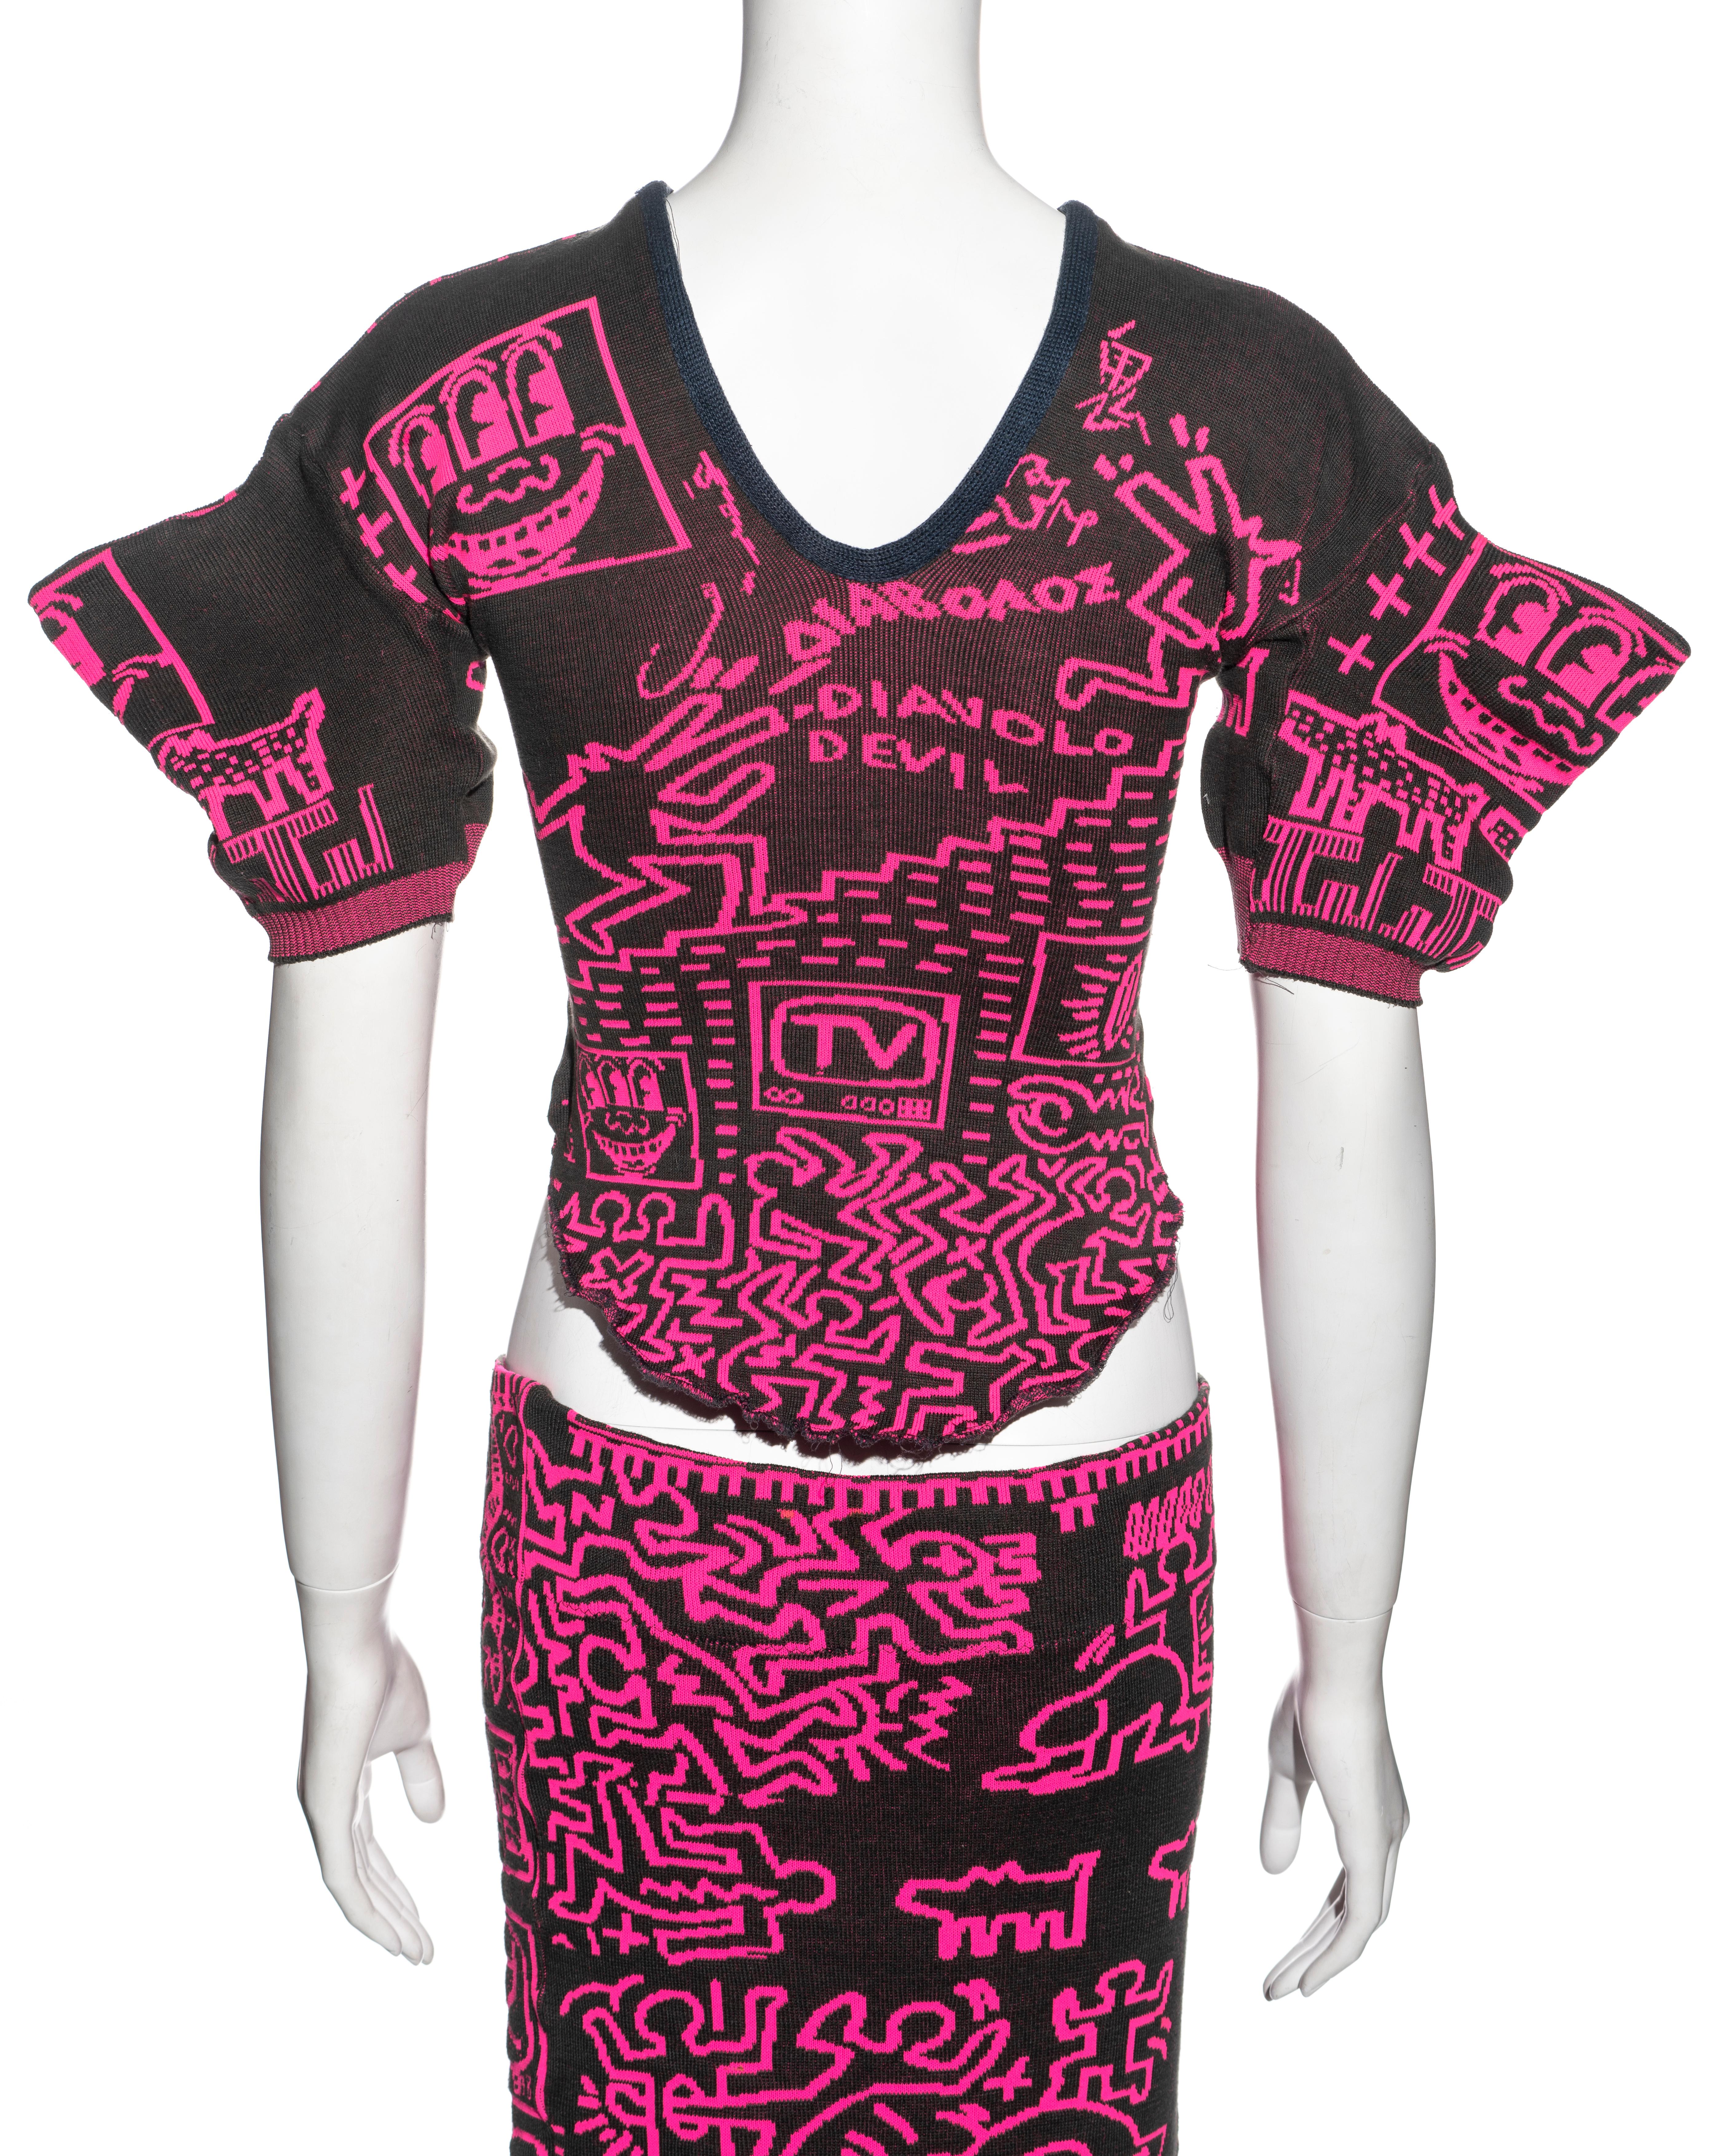 Vivienne Westwood x Malcolm McLaren x Keith Haring 'Witches' skirt suit, fw 1983 For Sale 1